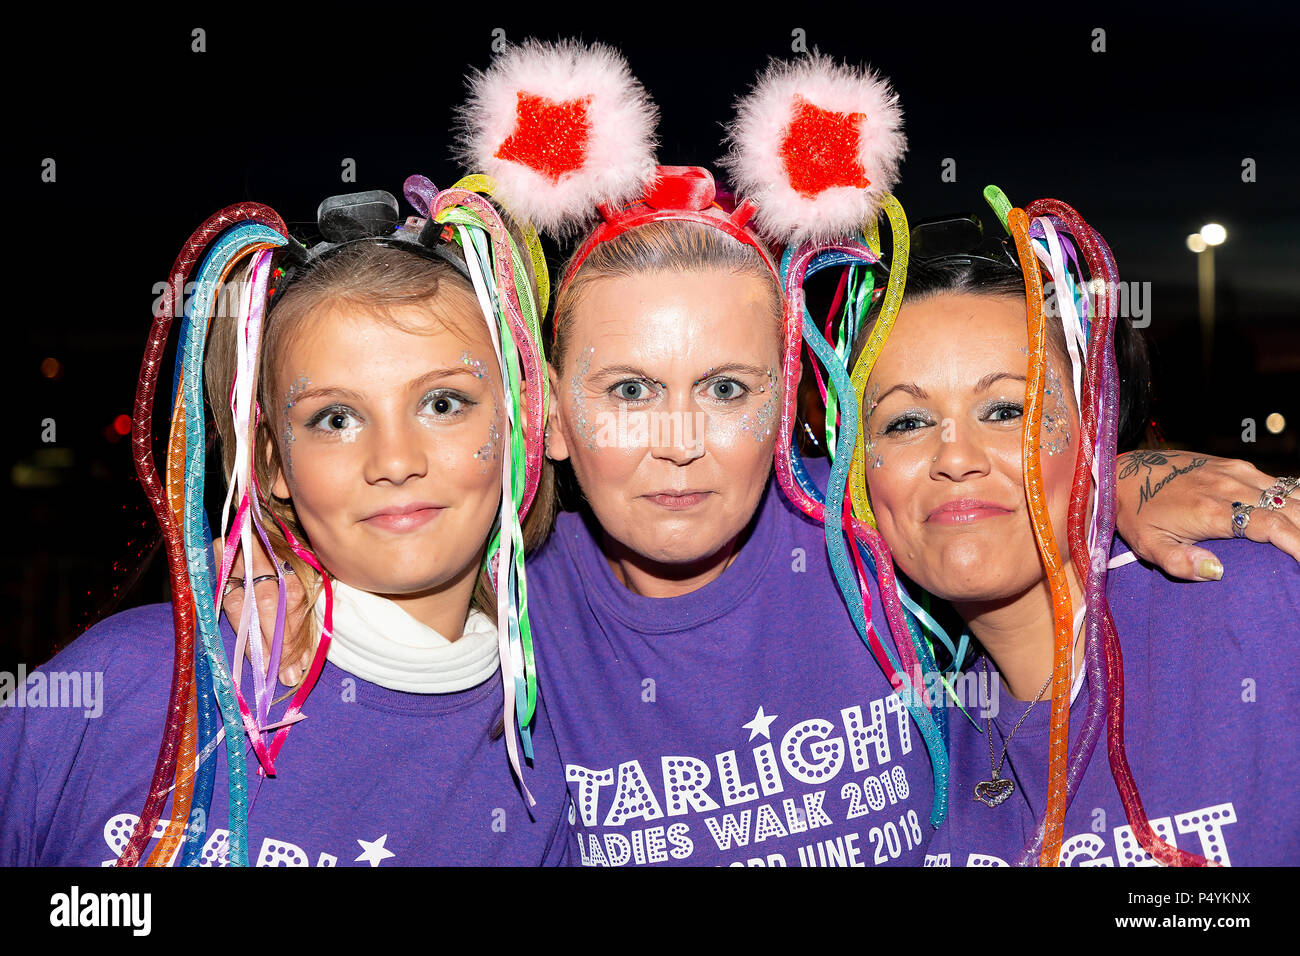 Warrington, UK. 23rd June, 2018. 23 June 2018 - Starlight Ladies Walk, a sponsored ladies-only walk which begins at midnight at the Orford Jubilee Neighbourhood Hub. The aim is to raise as much money as possible for St. Rocco’s Hospice a Registered Charity that provides specialist care and support across Warrington, helping those who are coping with a life-limiting illness. Credit: John Hopkins/Alamy Live News Stock Photo